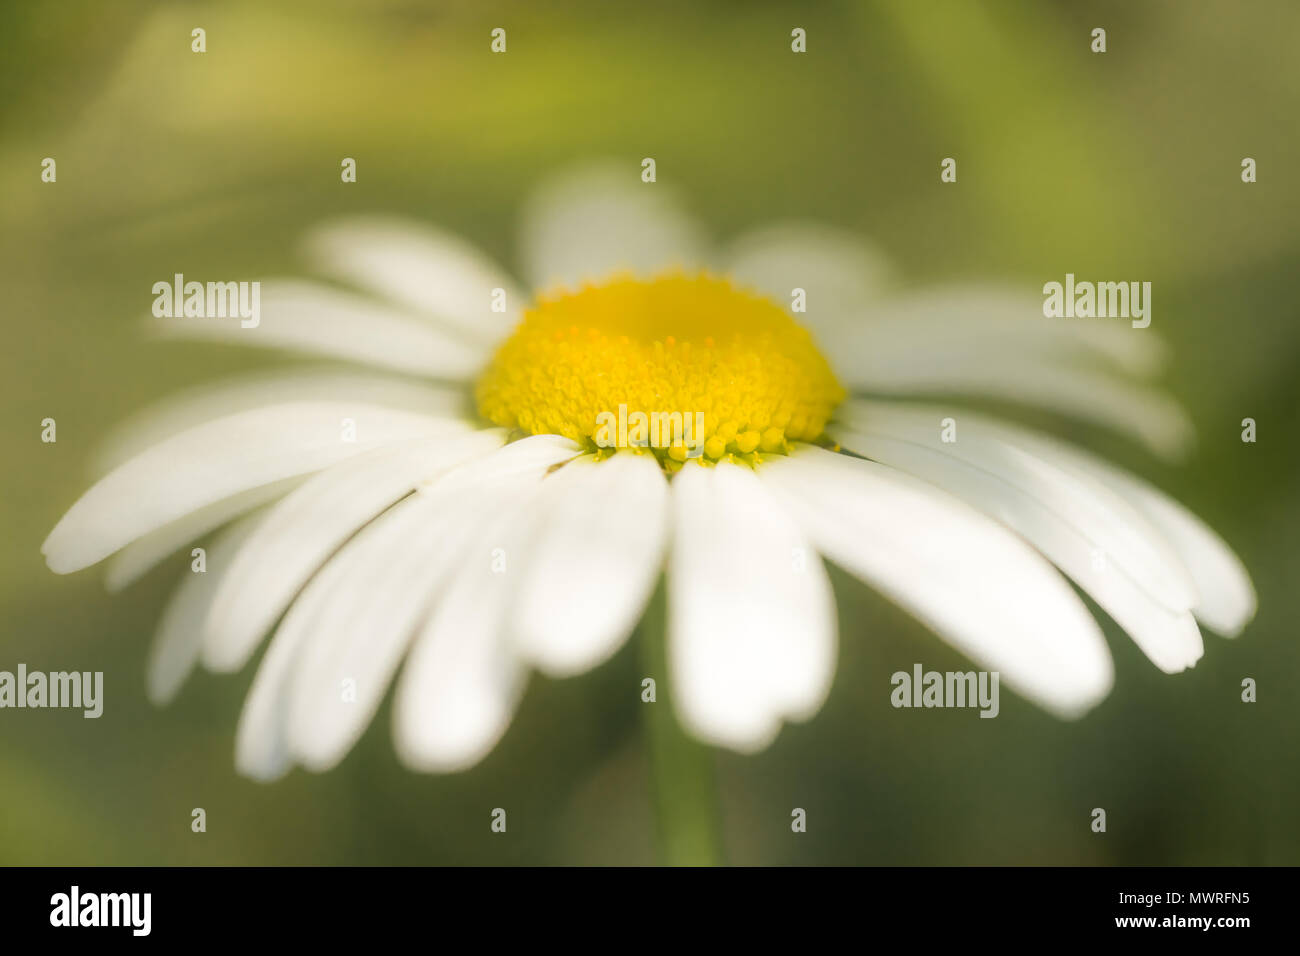 Up close and personal with the simple beauty of a Daisy. Stock Photo